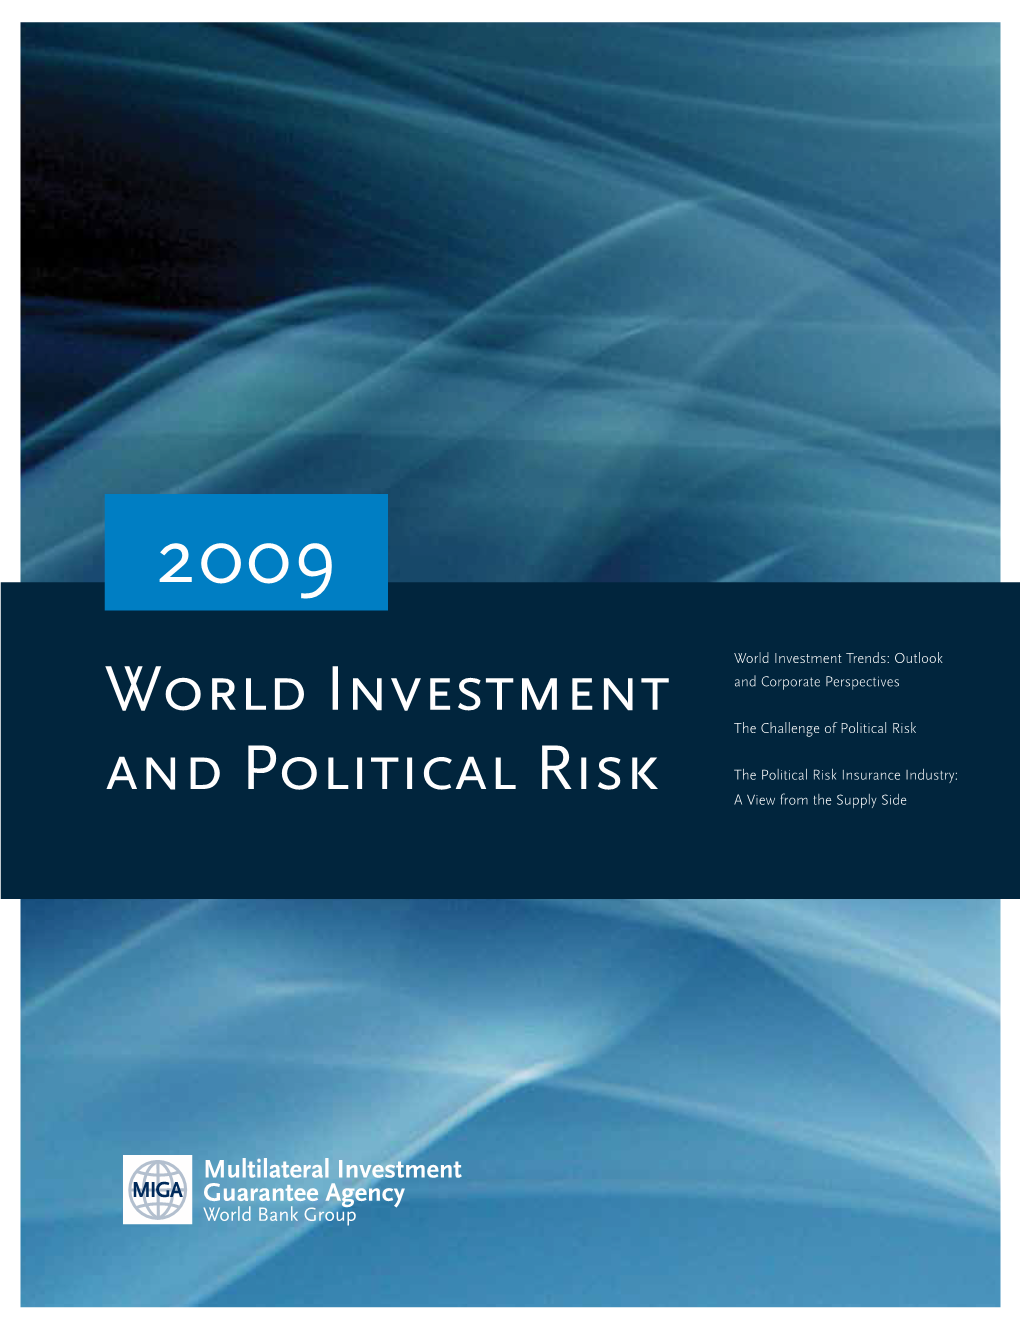 World Investment and Political Risk 09 MIGA BOXES Box 1.1 Recent Trends in FDI from the Brics